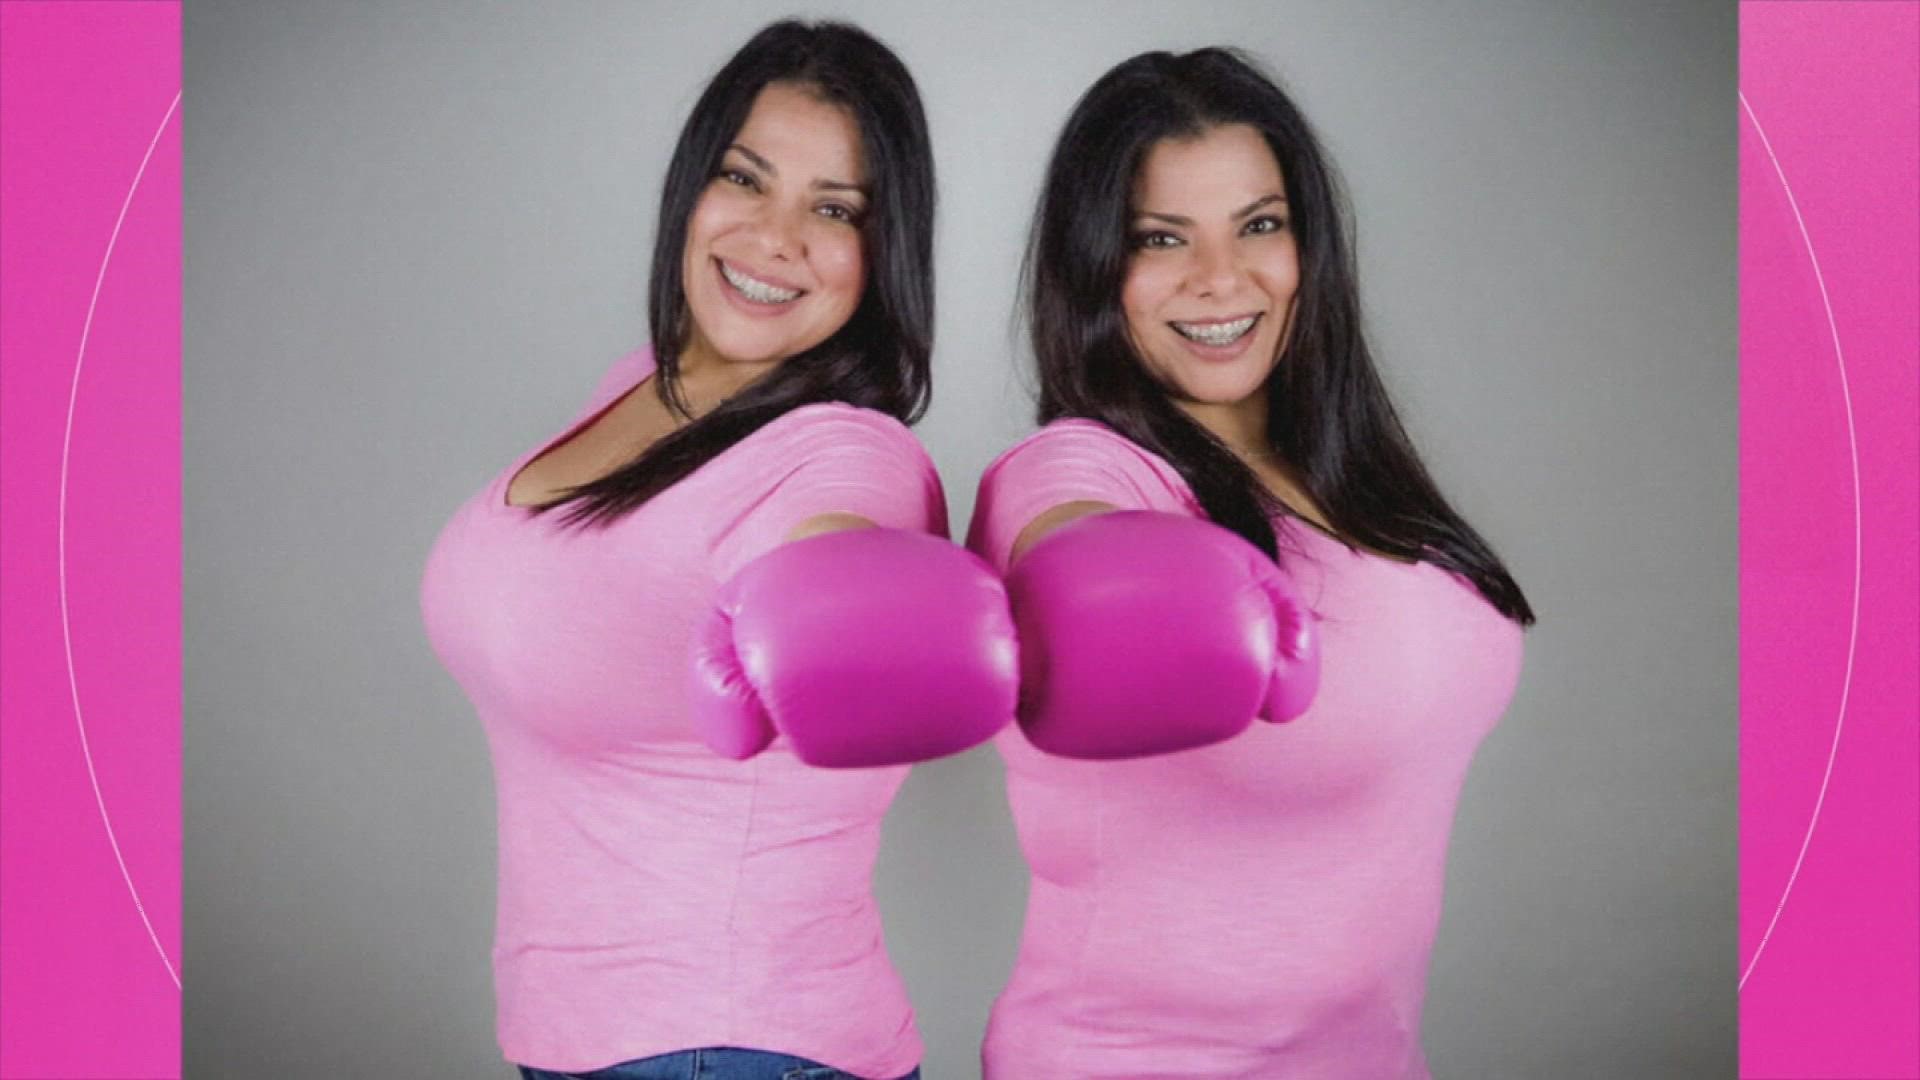 One has breast cancer, and the other is fighting that 1 in 8 chance.